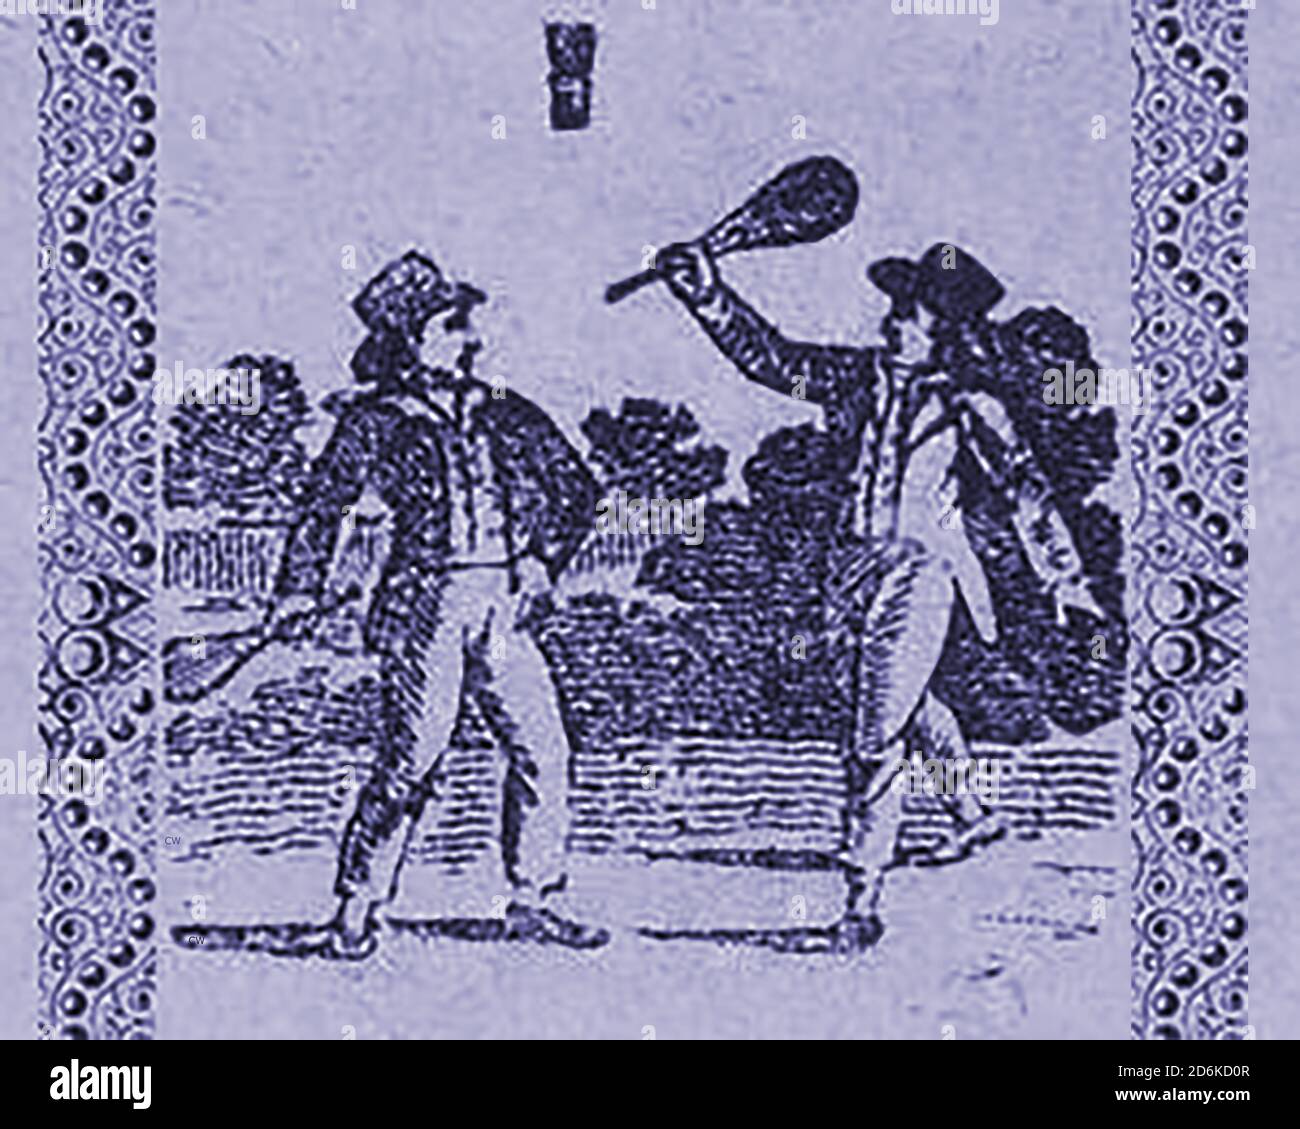 British Victorian games and pastimes - Playing shuttlecock or Battledore  in the 1830's. It was sometimes referred to as  Jeu de Volant,  an attempt by the upper classes to distance themselves from similar games played by their working class counterparts.  The early sport related to that of modern badminton. The bats were the BATtledores and the object of the game was to pass the shuttlecock backwards & forwards between players without it falling to the ground. The game has a long history with the shuttlecocks taking many  lightweight forms,e.g.cork & feathers, sweet corn cobs and corn leaves. Stock Photo